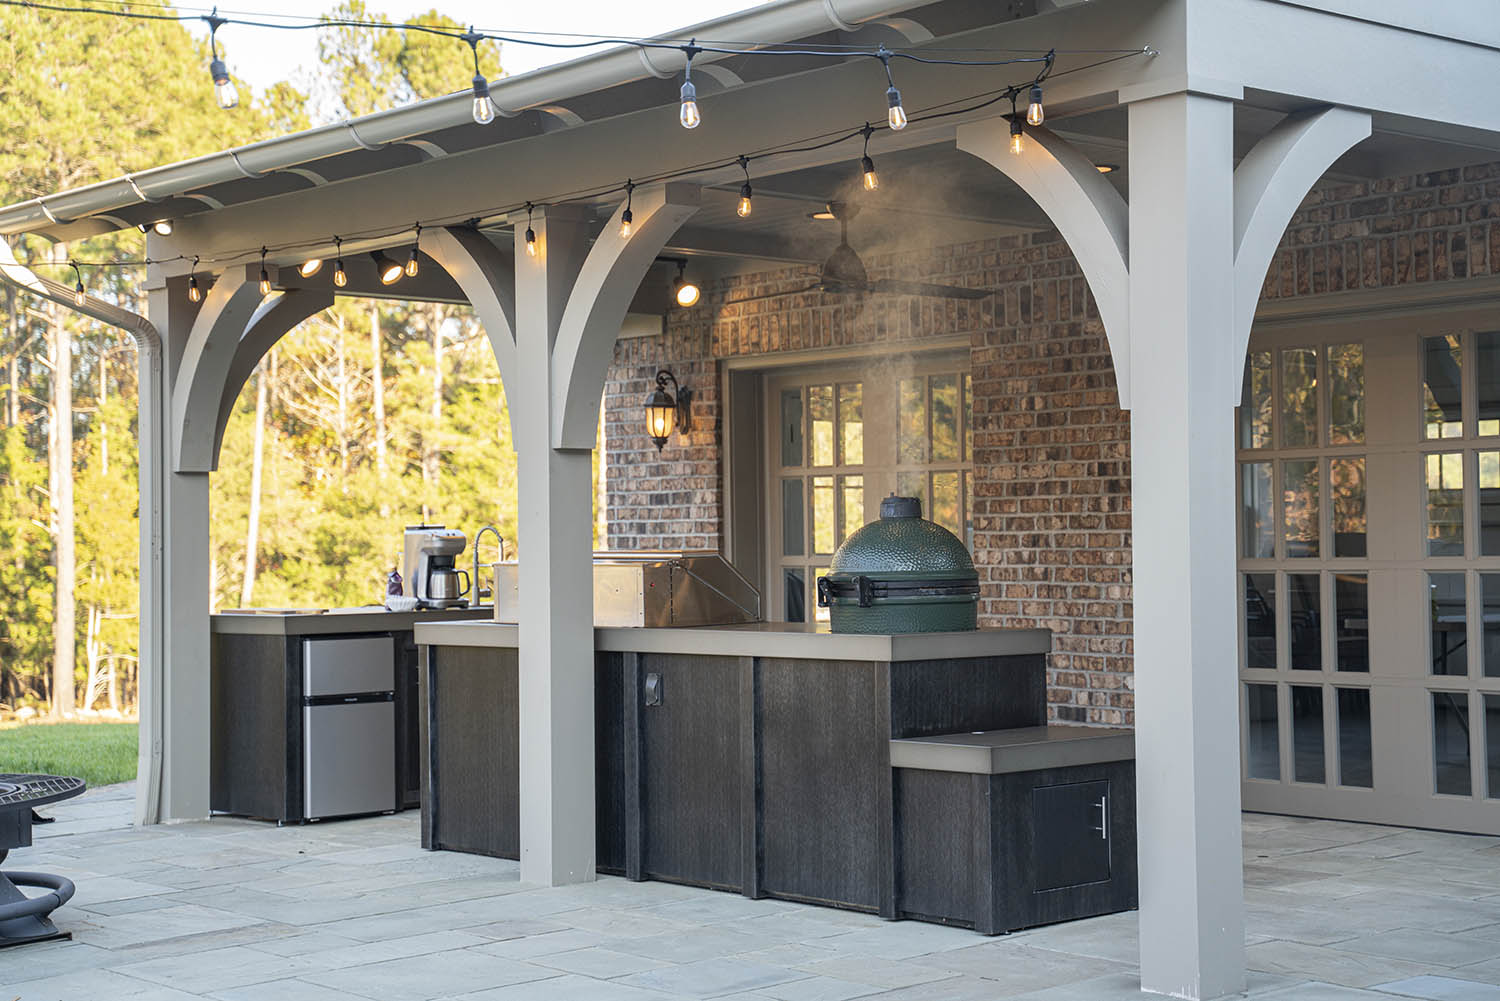 Stoll covered outdoor kitchen with string lighting